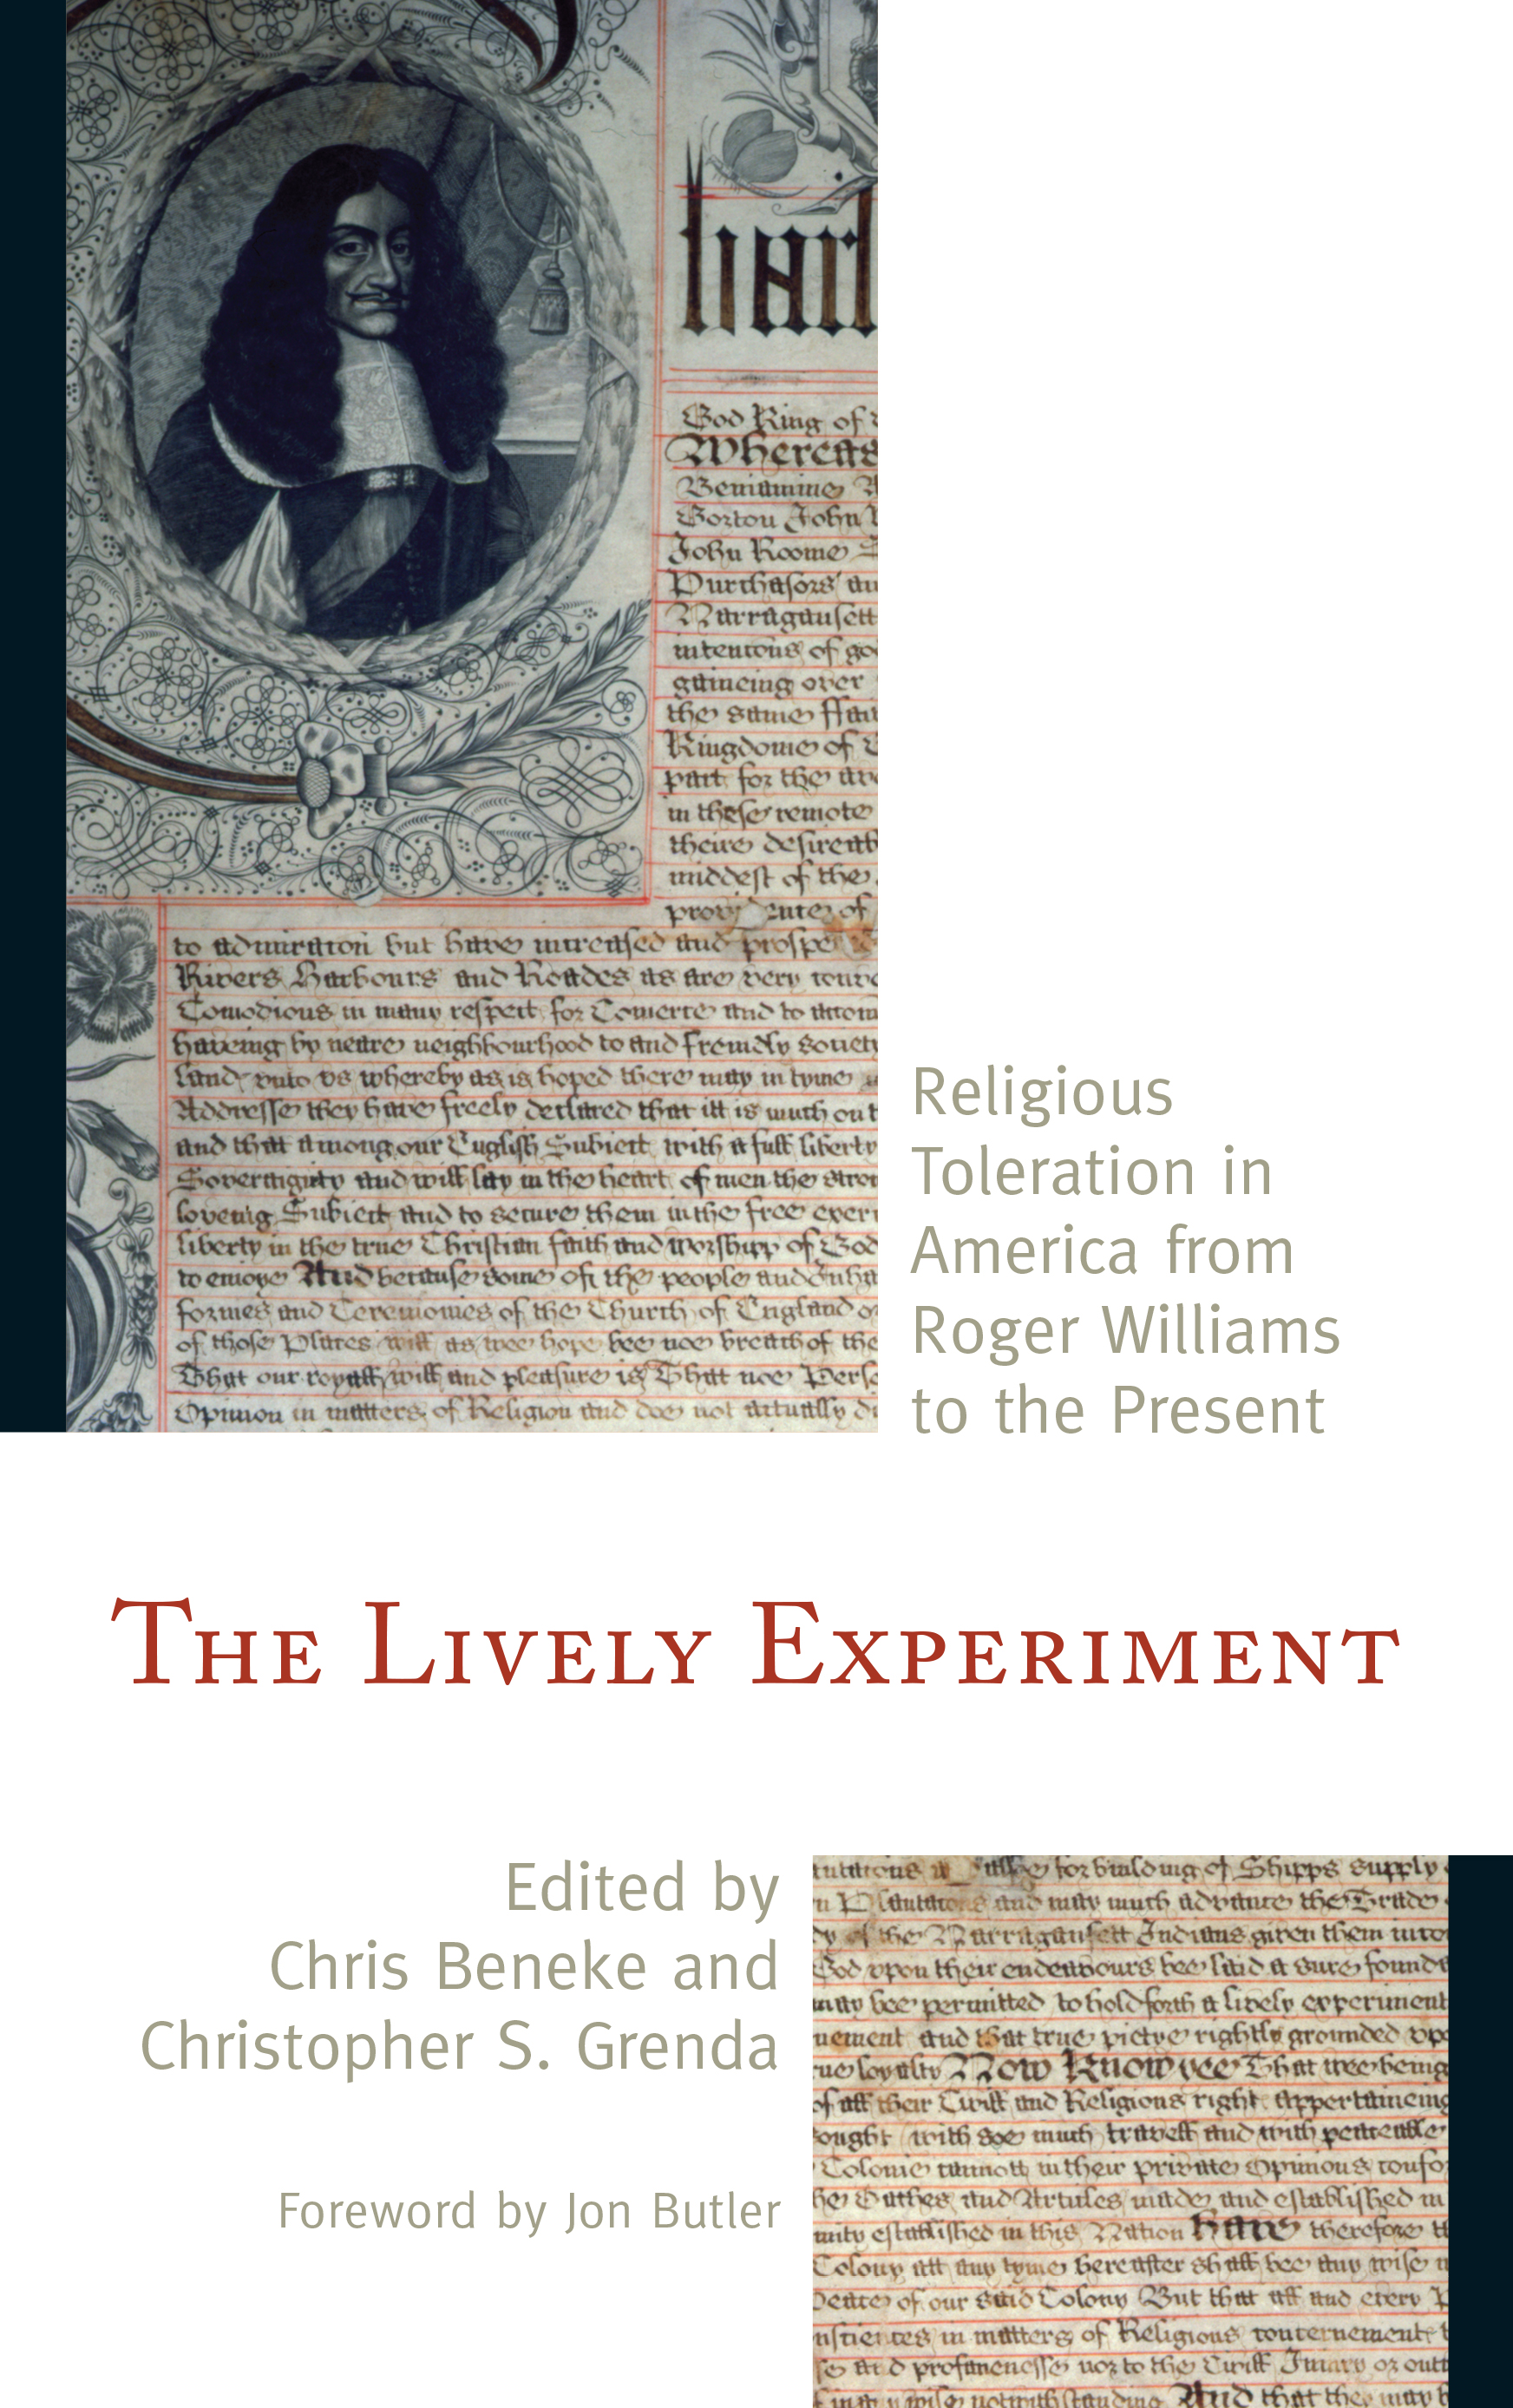 The Lively Experiment: Religious Toleration in America from Roger Williams to the Present